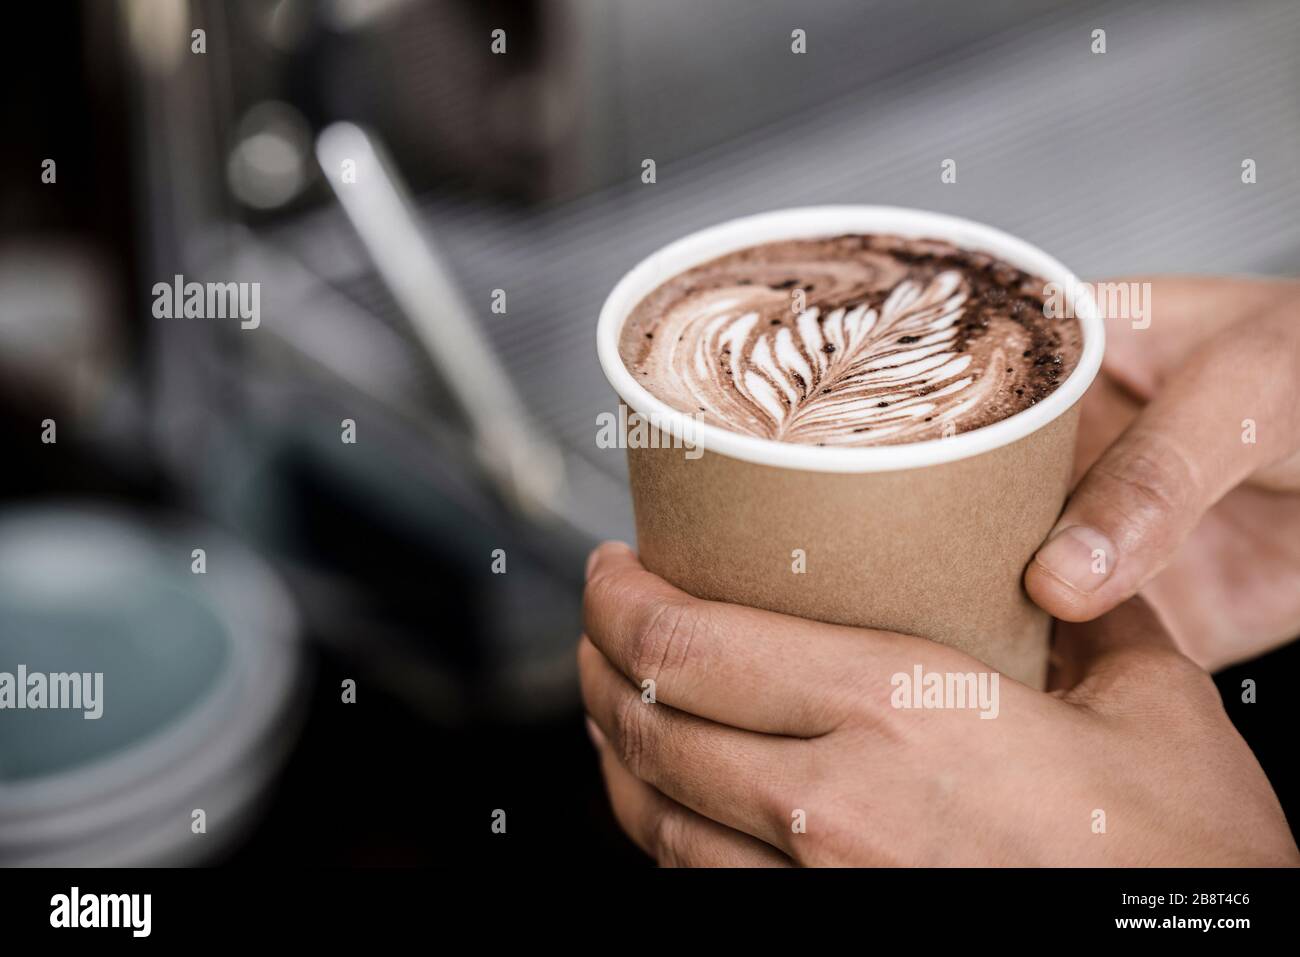 Close up shot of male hands holding take away cup of brewed hot coffee with Fern latte art design Stock Photo